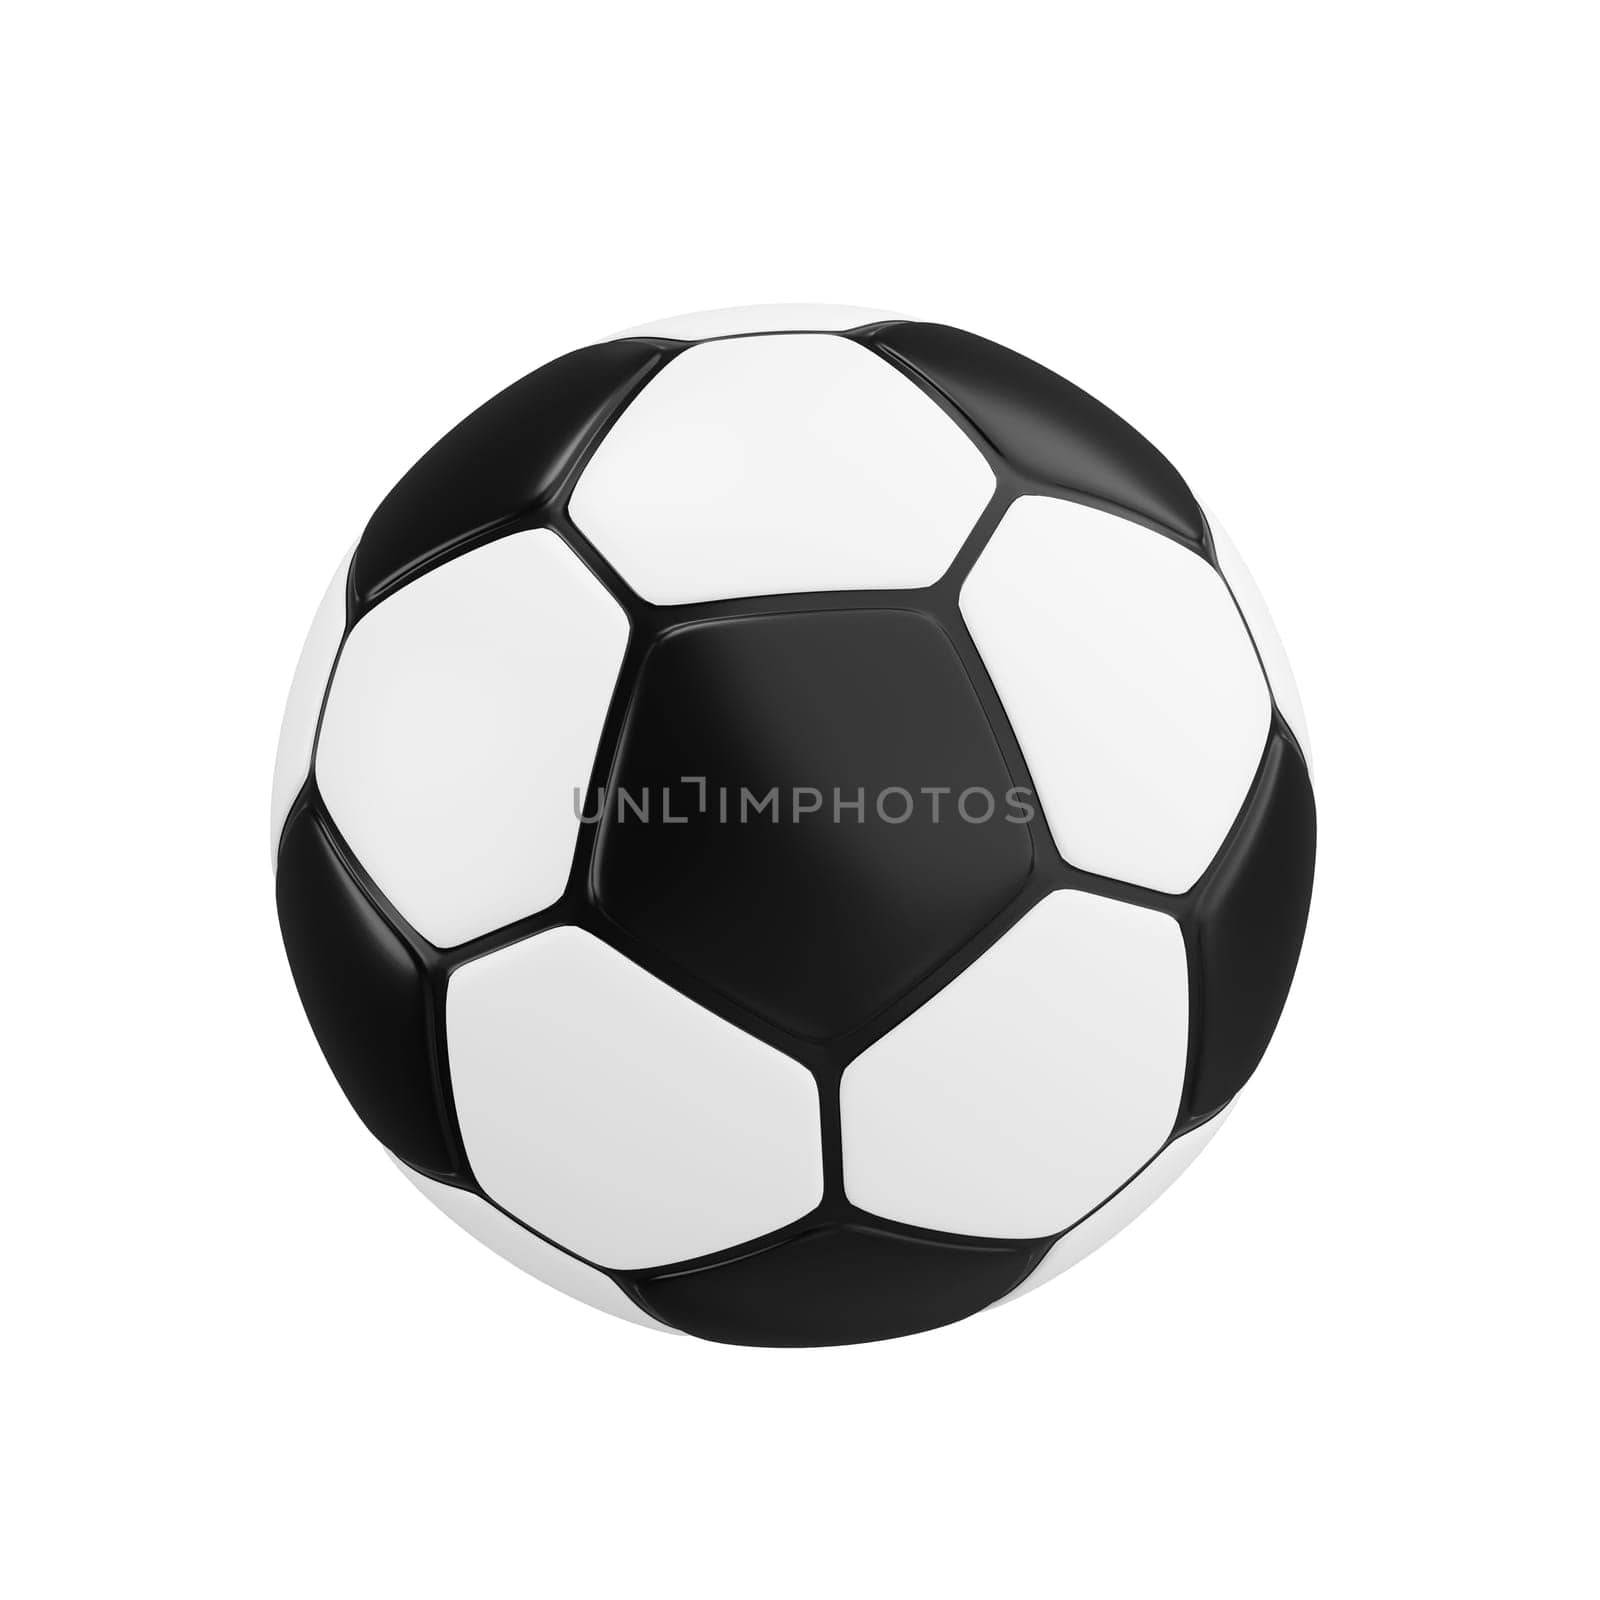 3d football. minimal school icon. isolated on background, icon symbol clipping path. 3d render illustration by meepiangraphic